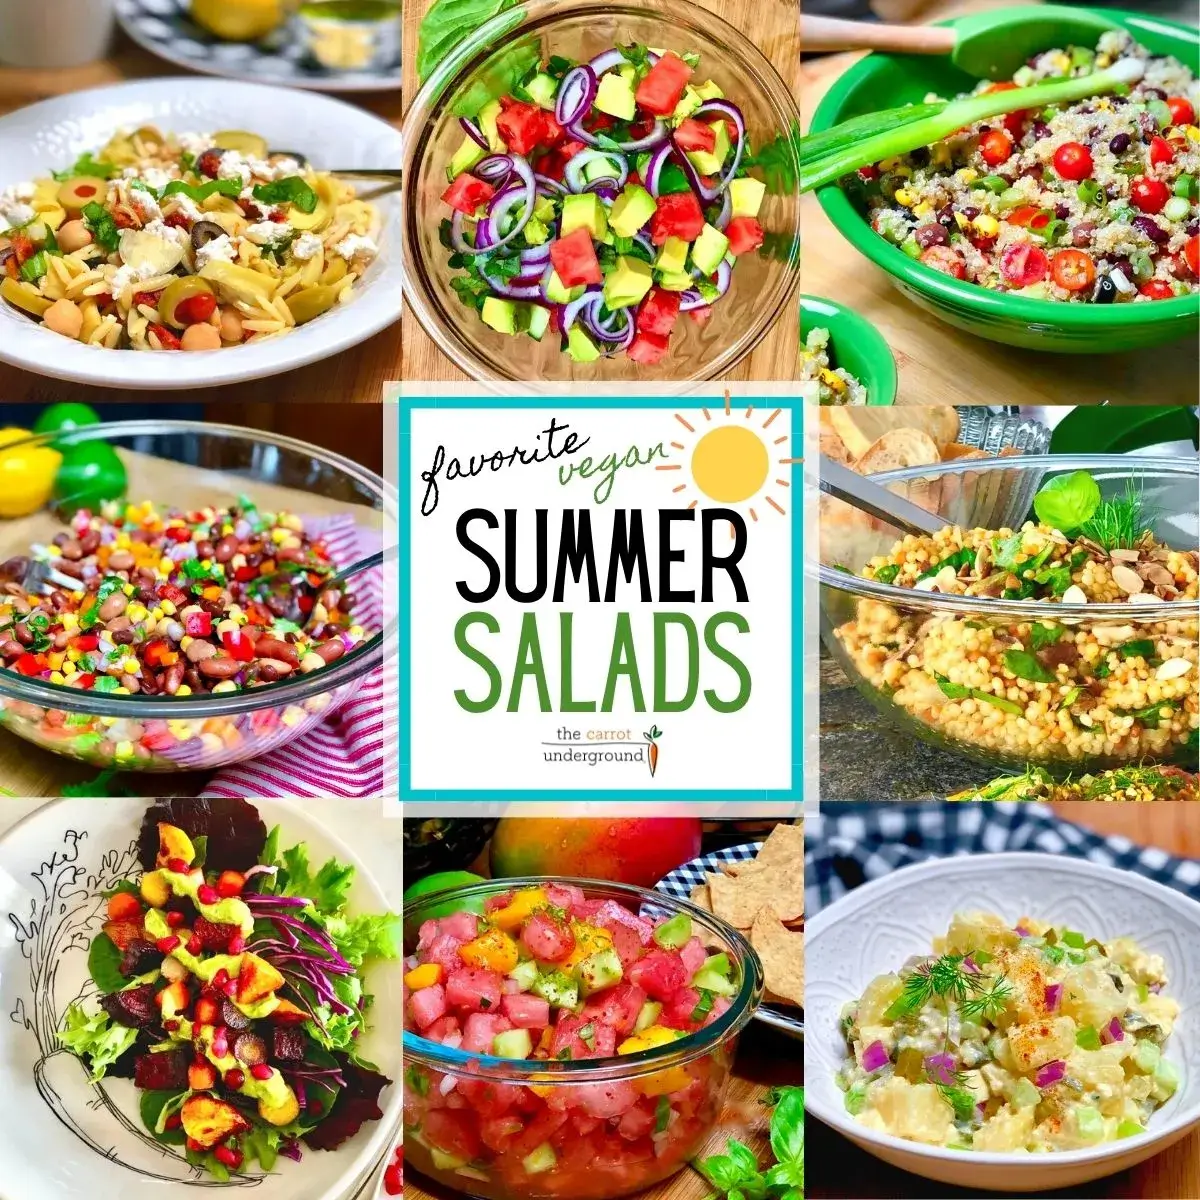 Healthy Summer Salad Dishes/Lifestyle Metro